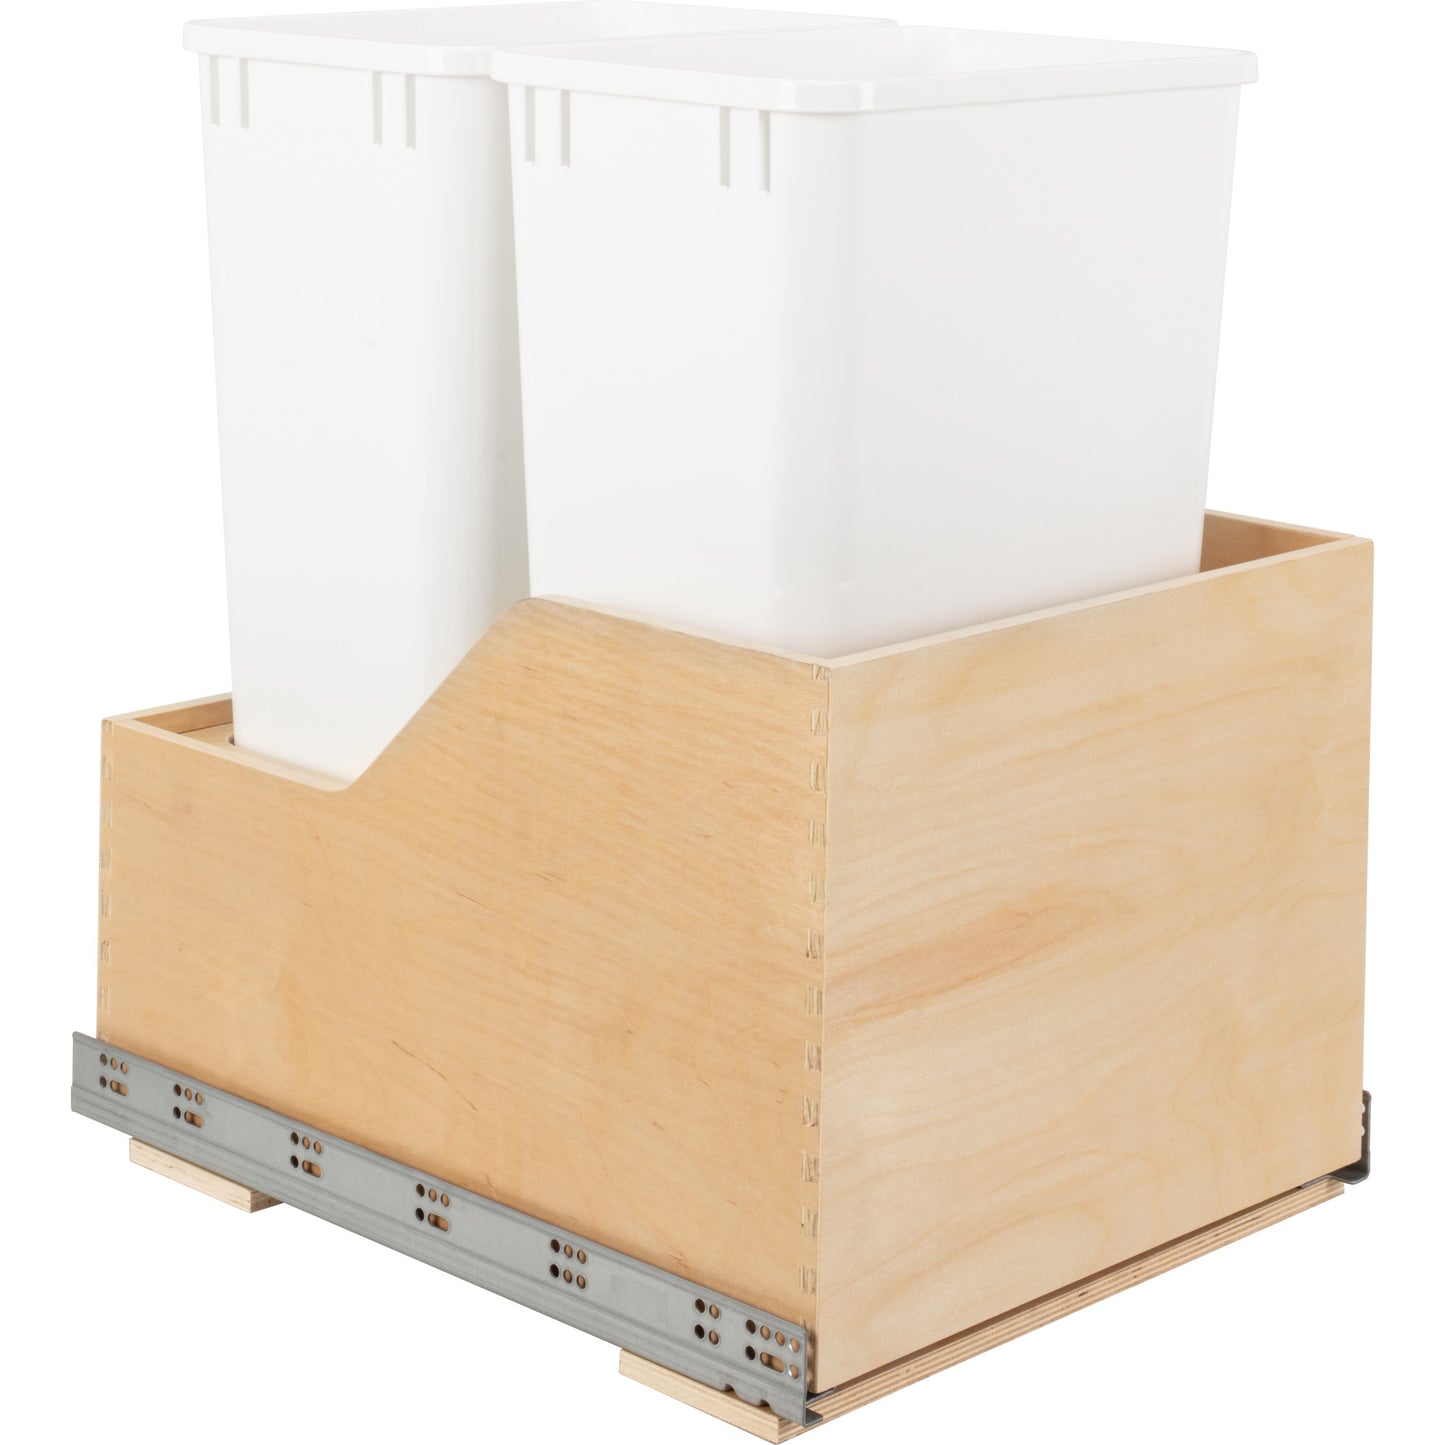 HARDWARE RESOURCES CAN-WBMD5018WH Double 50 Quart Wood Bottom-Mount Soft-close Trashcan Rollout for Hinged Doors, Includes Two White Cans